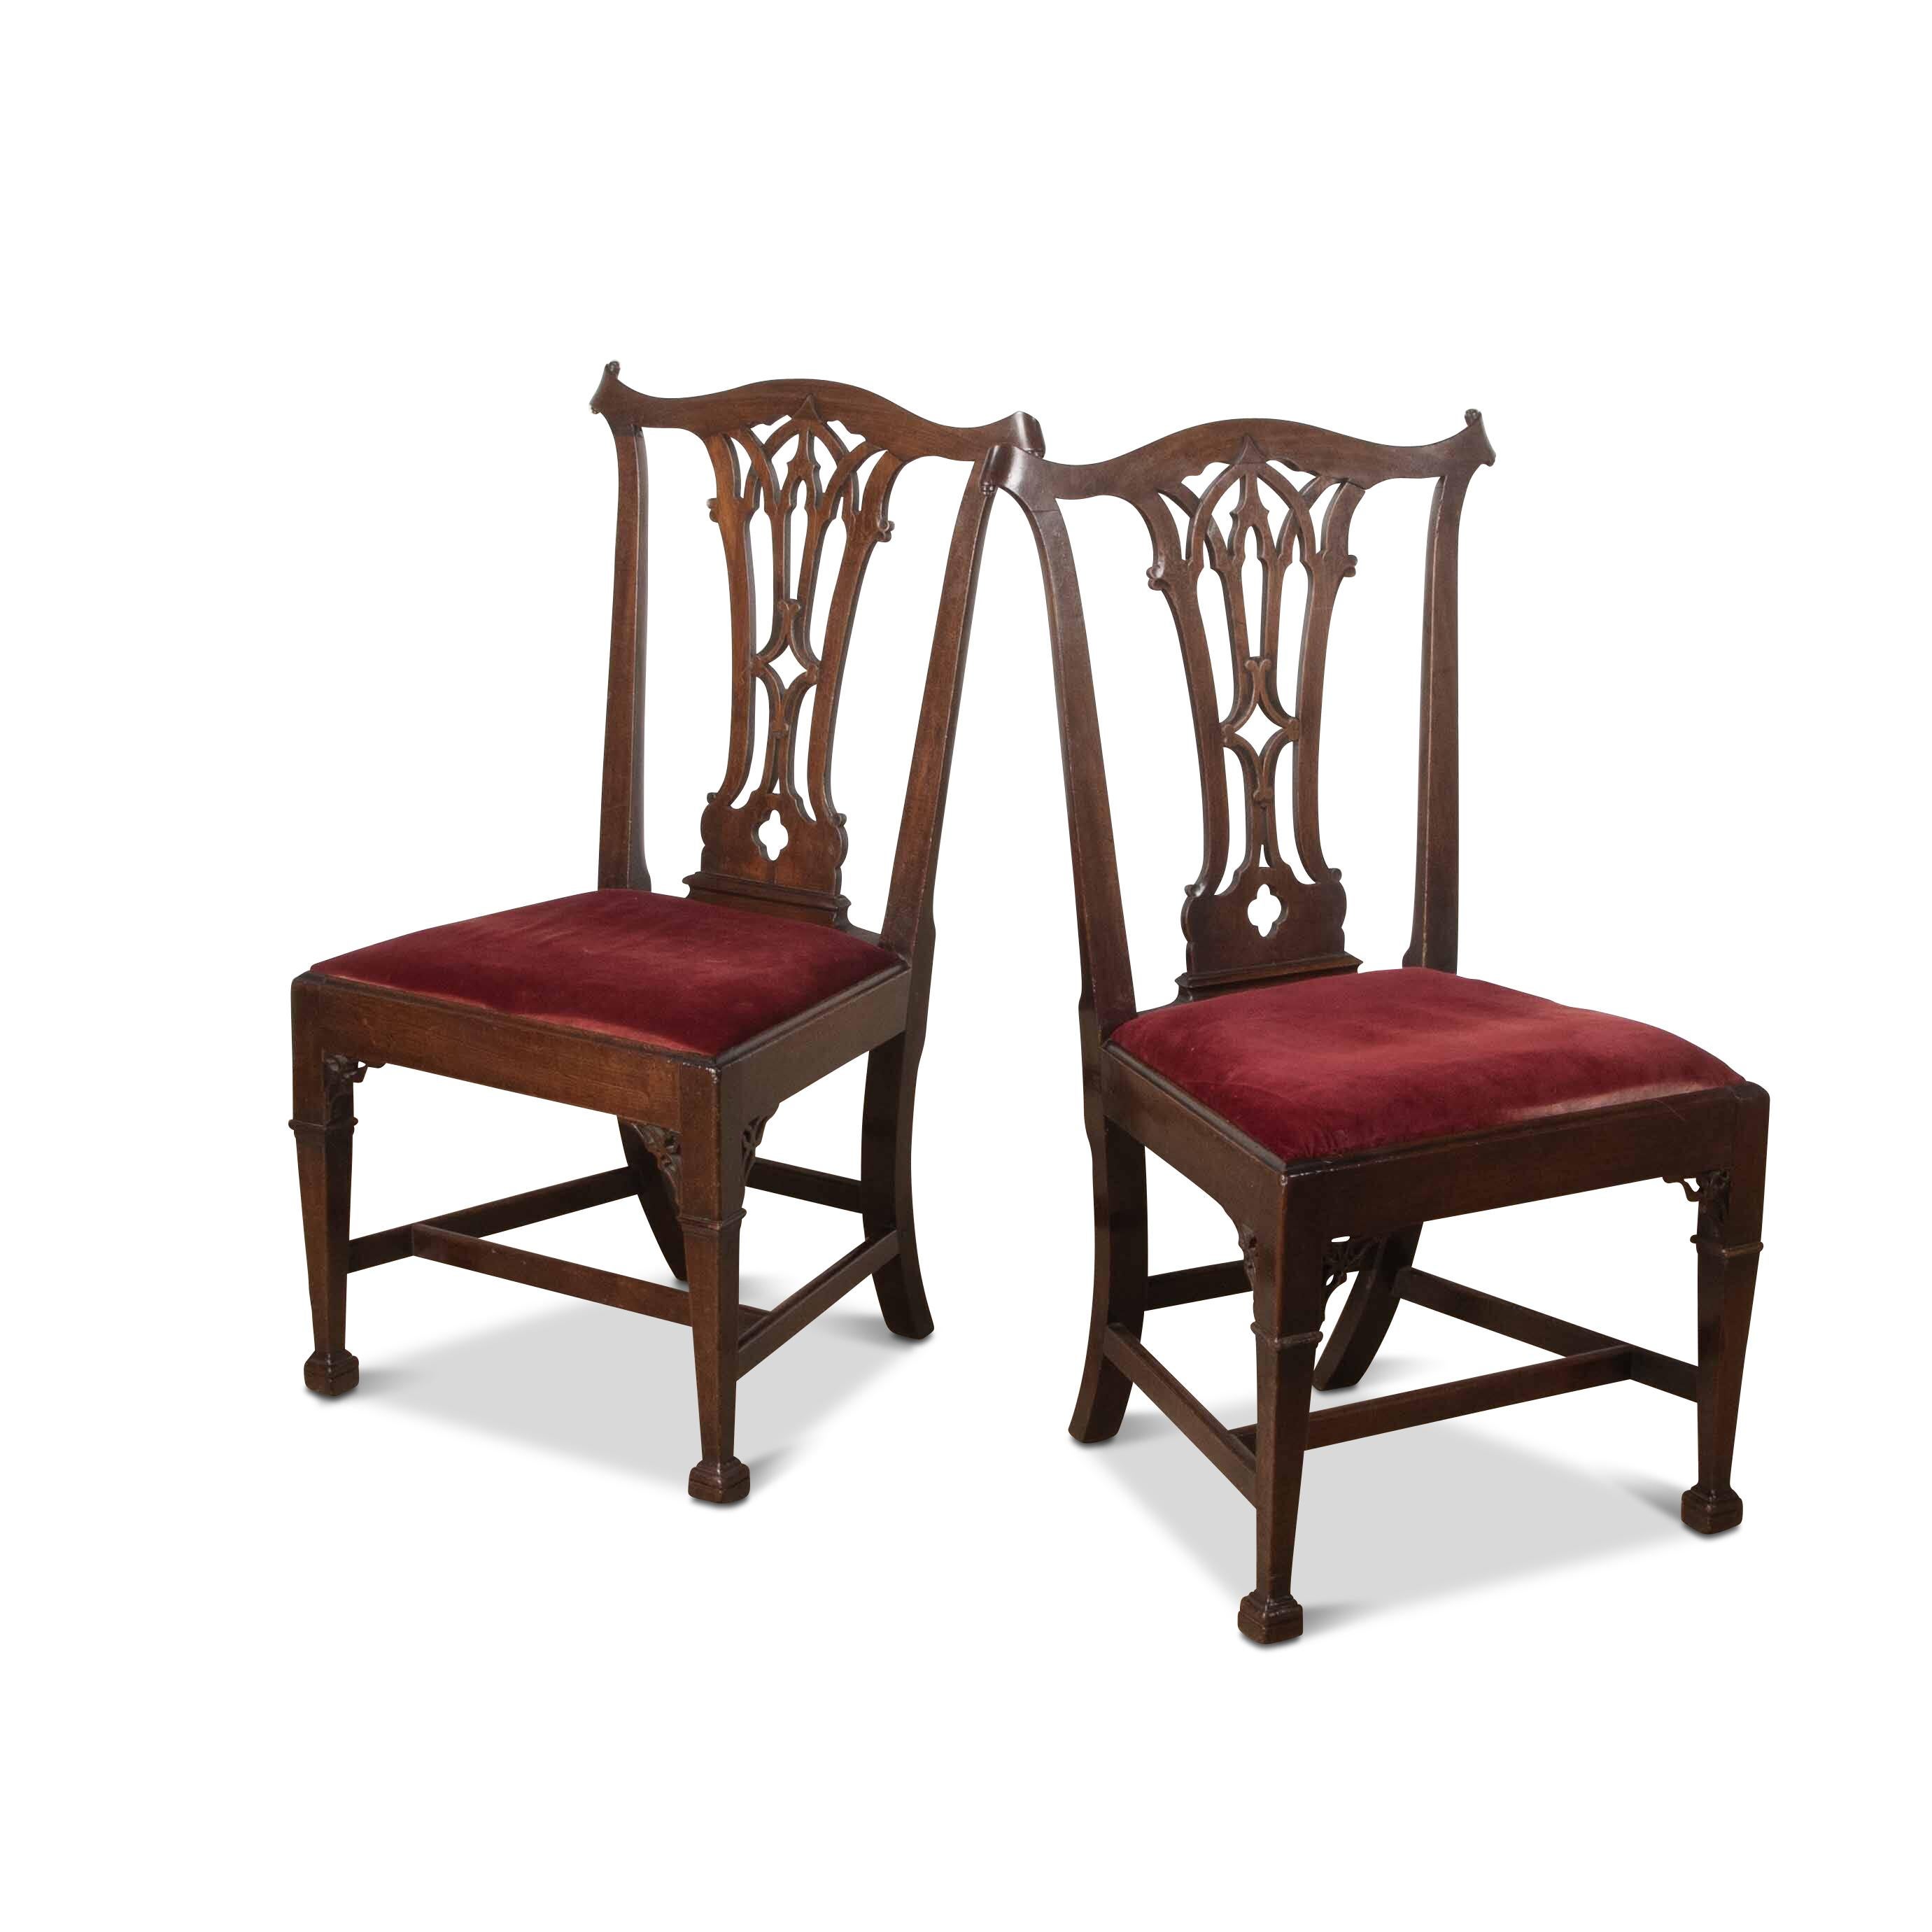 English Pair of C18th Mahogany Side Chairs For Sale